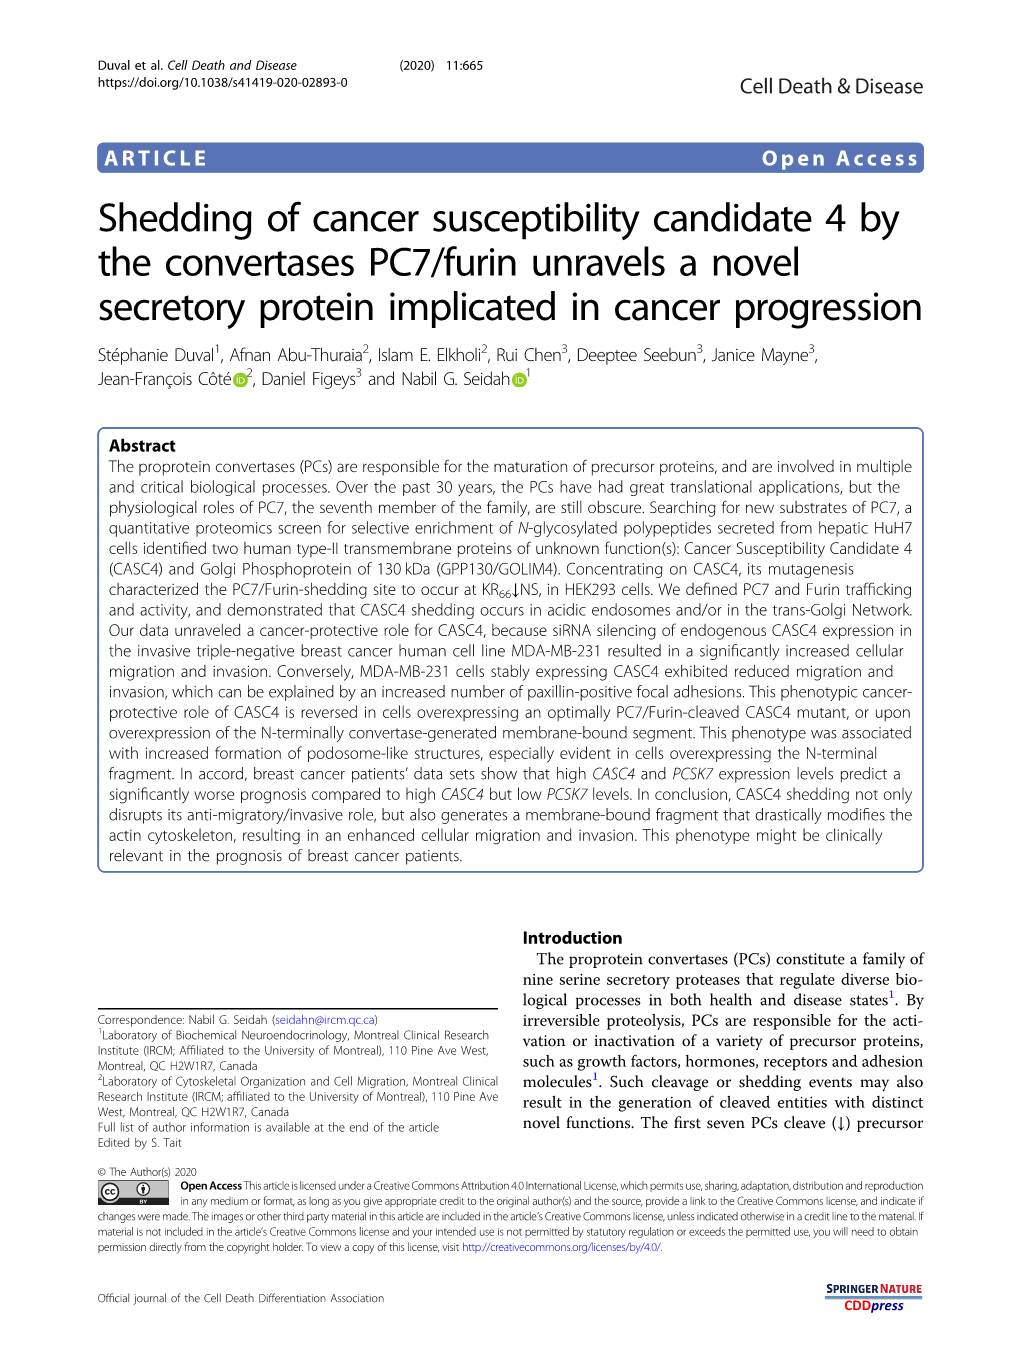 Shedding of Cancer Susceptibility Candidate 4 by the Convertases